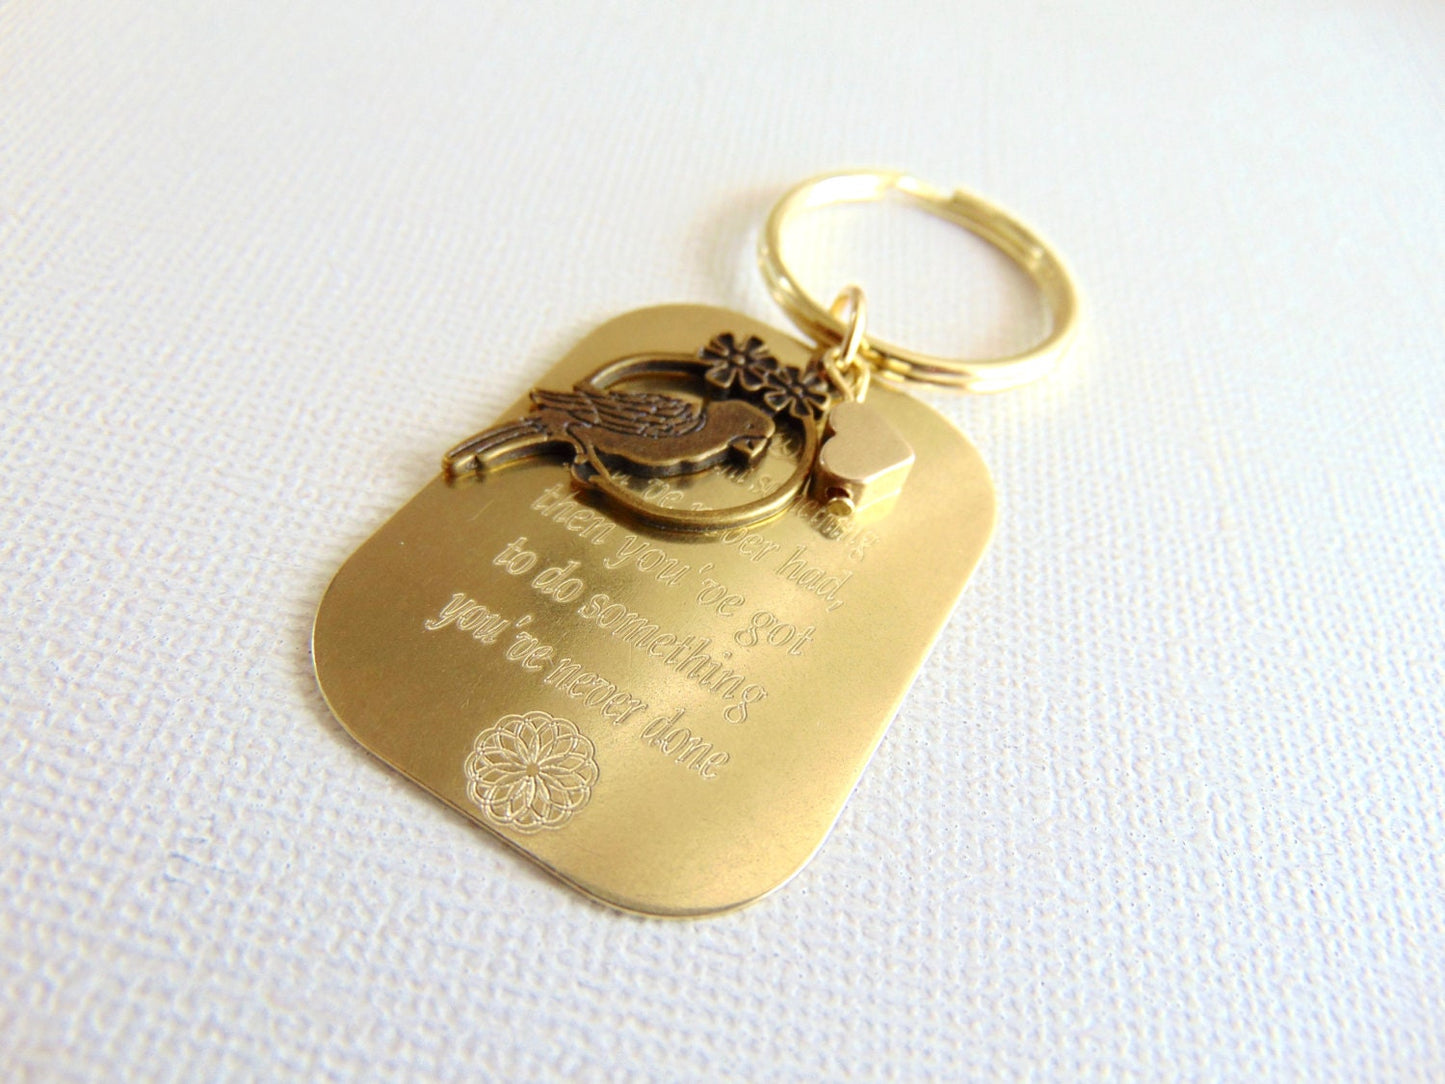 Personalized key chain, Engraved massage on key ring, Hebrew letters key charm, Mini mantra key chain, inspirational quote key holder plate